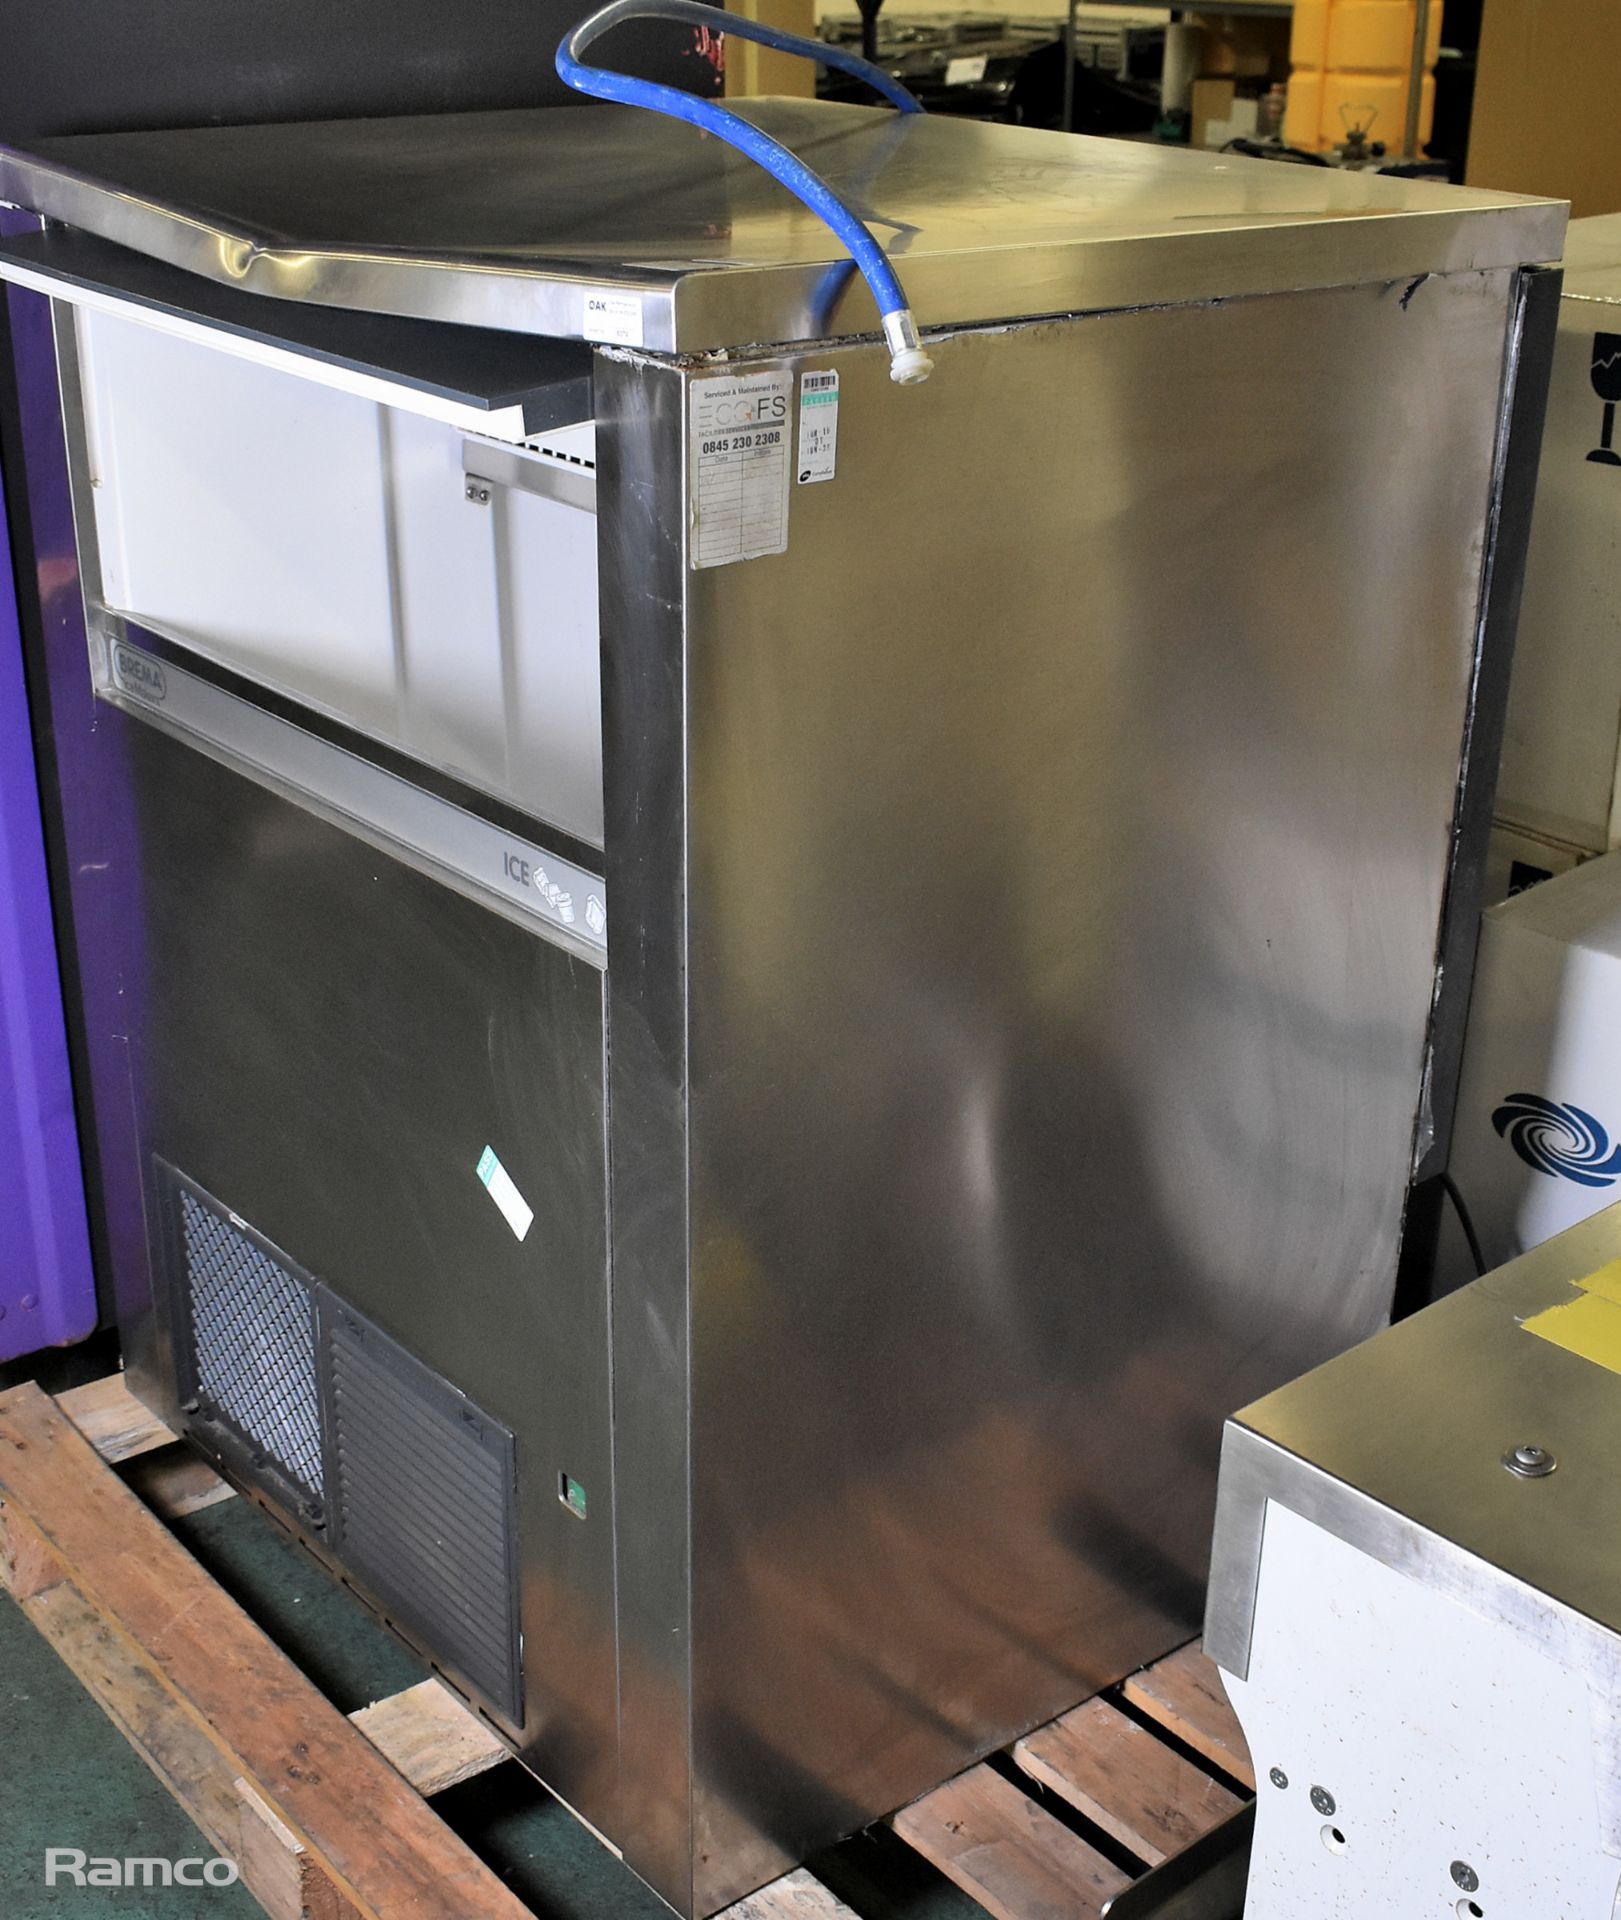 Brema CB1265A-Q stainless steel ice maker - W 840 x D 740 x H 1070mm - DENTED TOP PANEL - Image 5 of 6